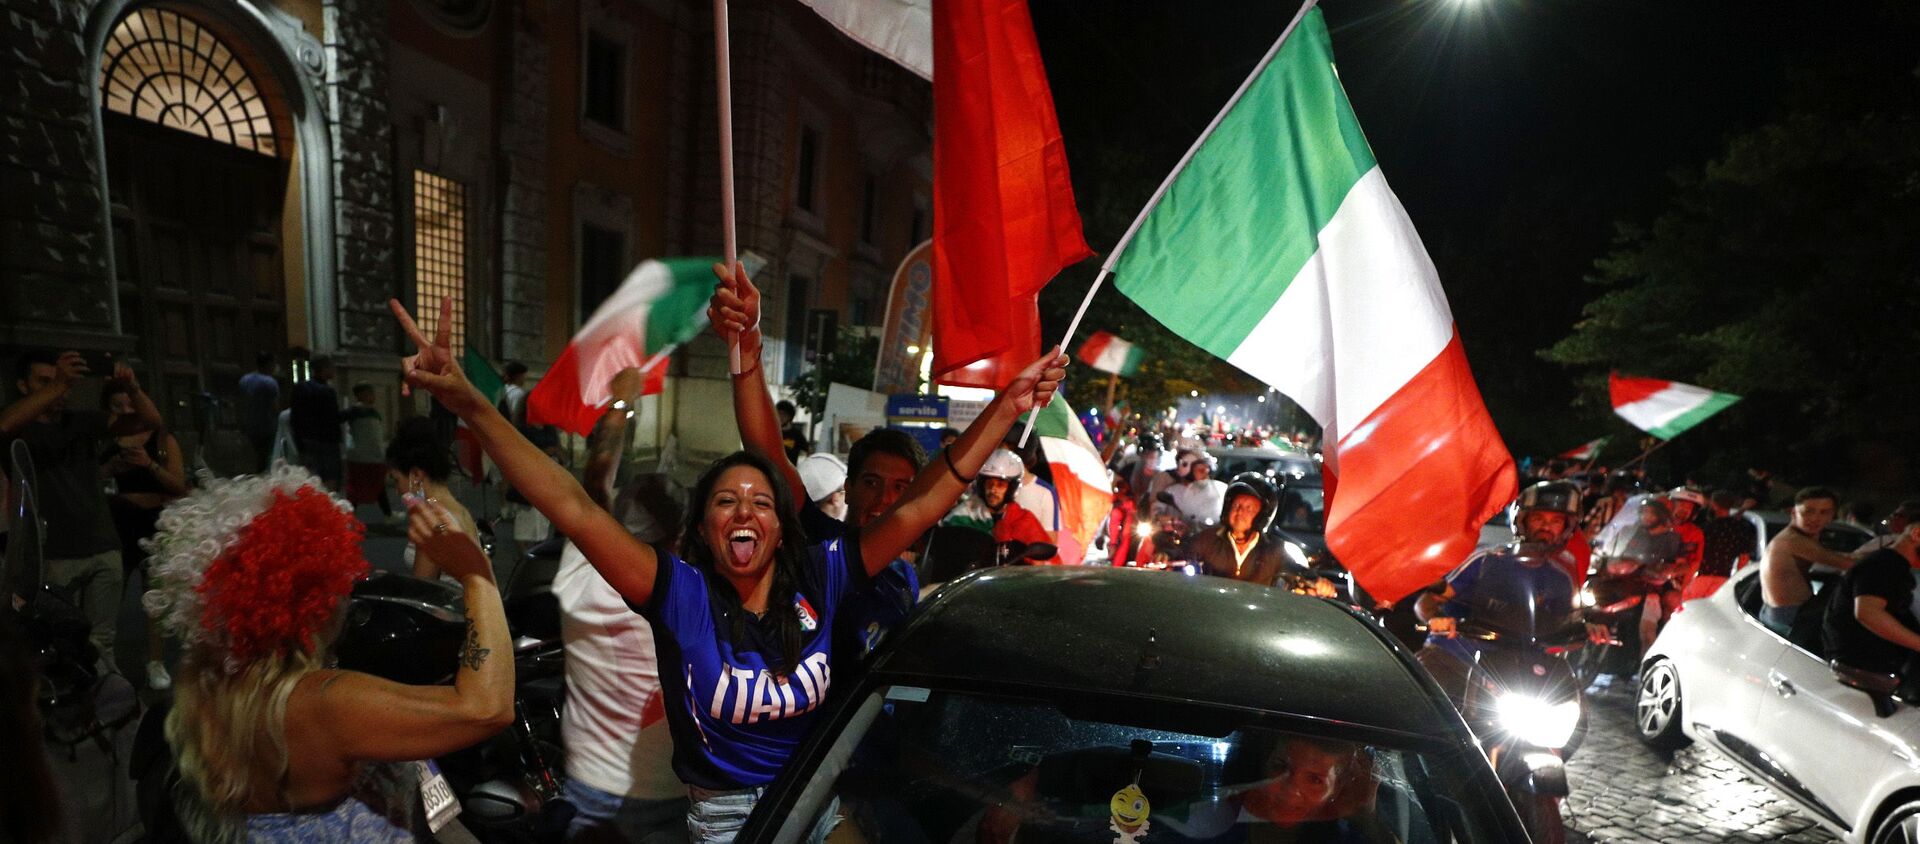 Soccer Football - Euro 2020 - Final - Fans gather for Italy v England - Rome, Italy - July 11, 2021 Italy fans celebrate after winning the Euro 2020 - Sputnik International, 1920, 12.07.2021